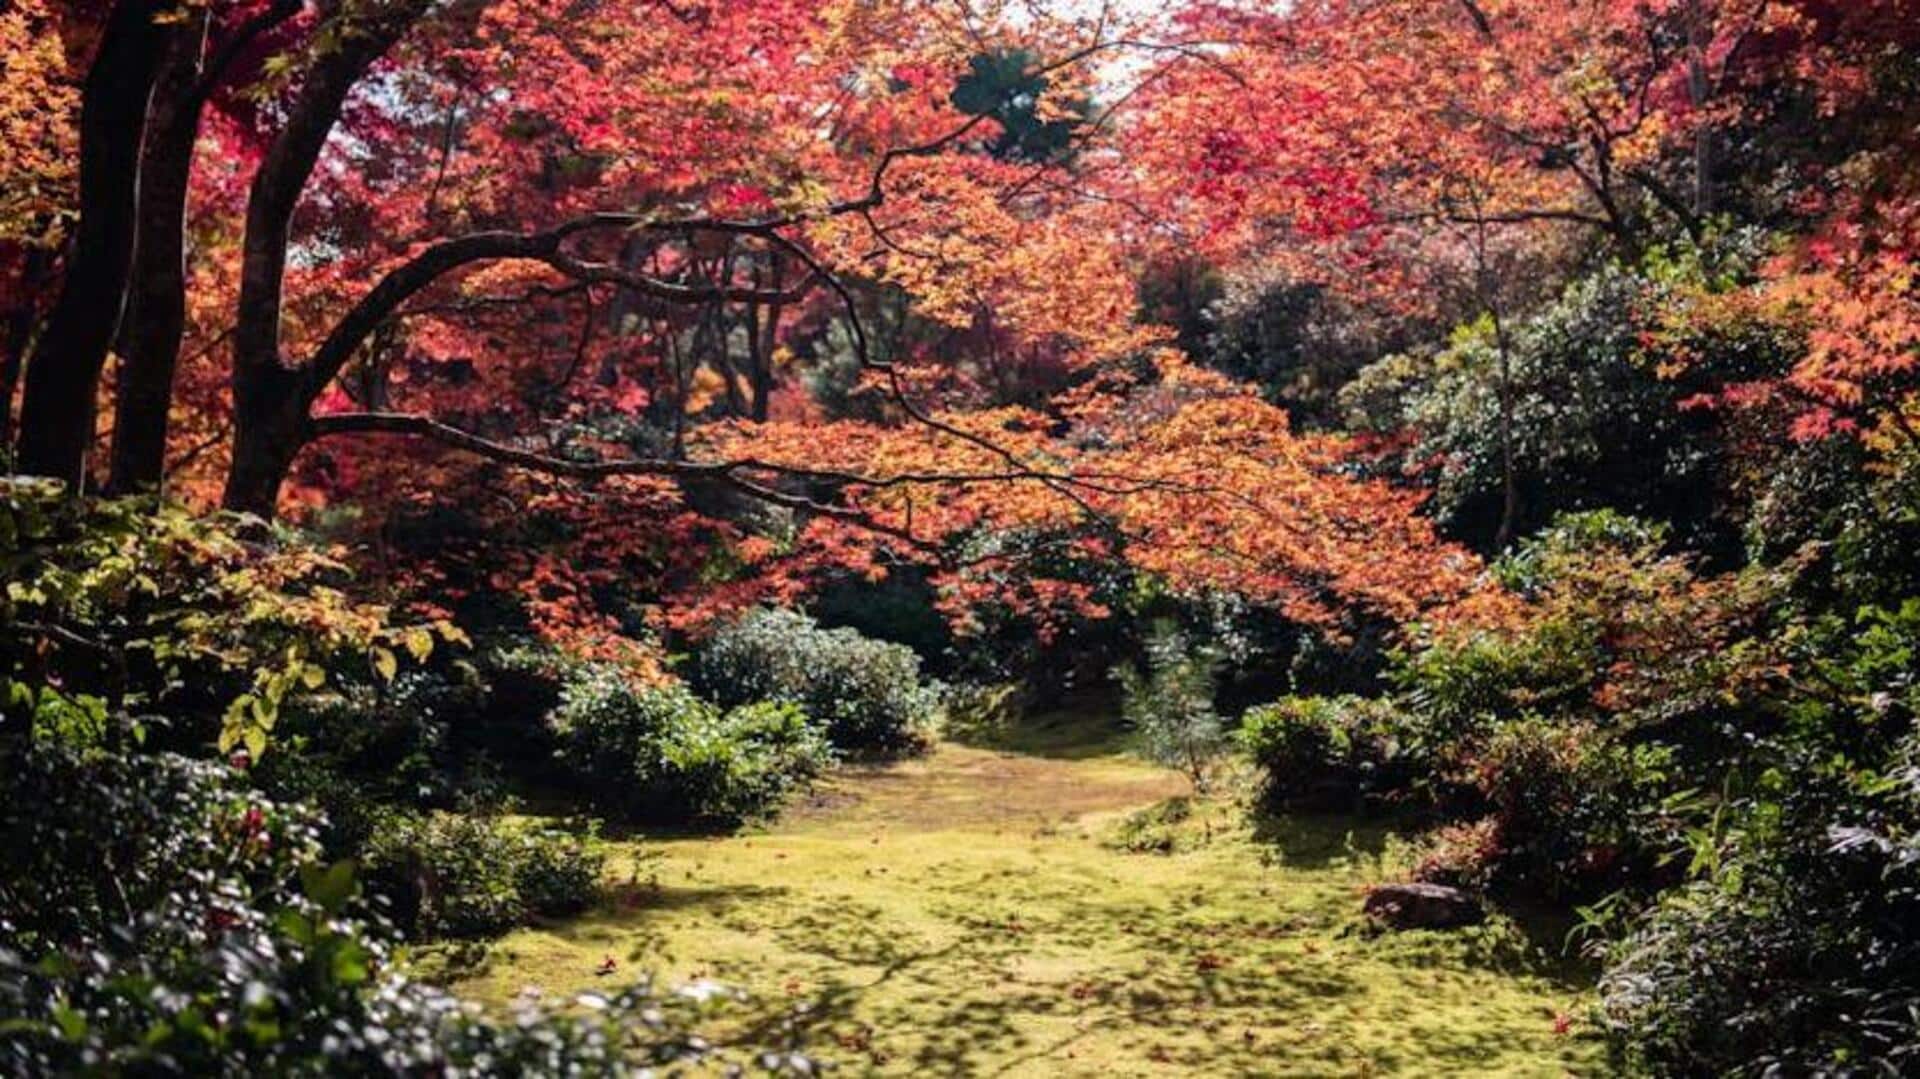 Head over to Kyoto's most serene gardens